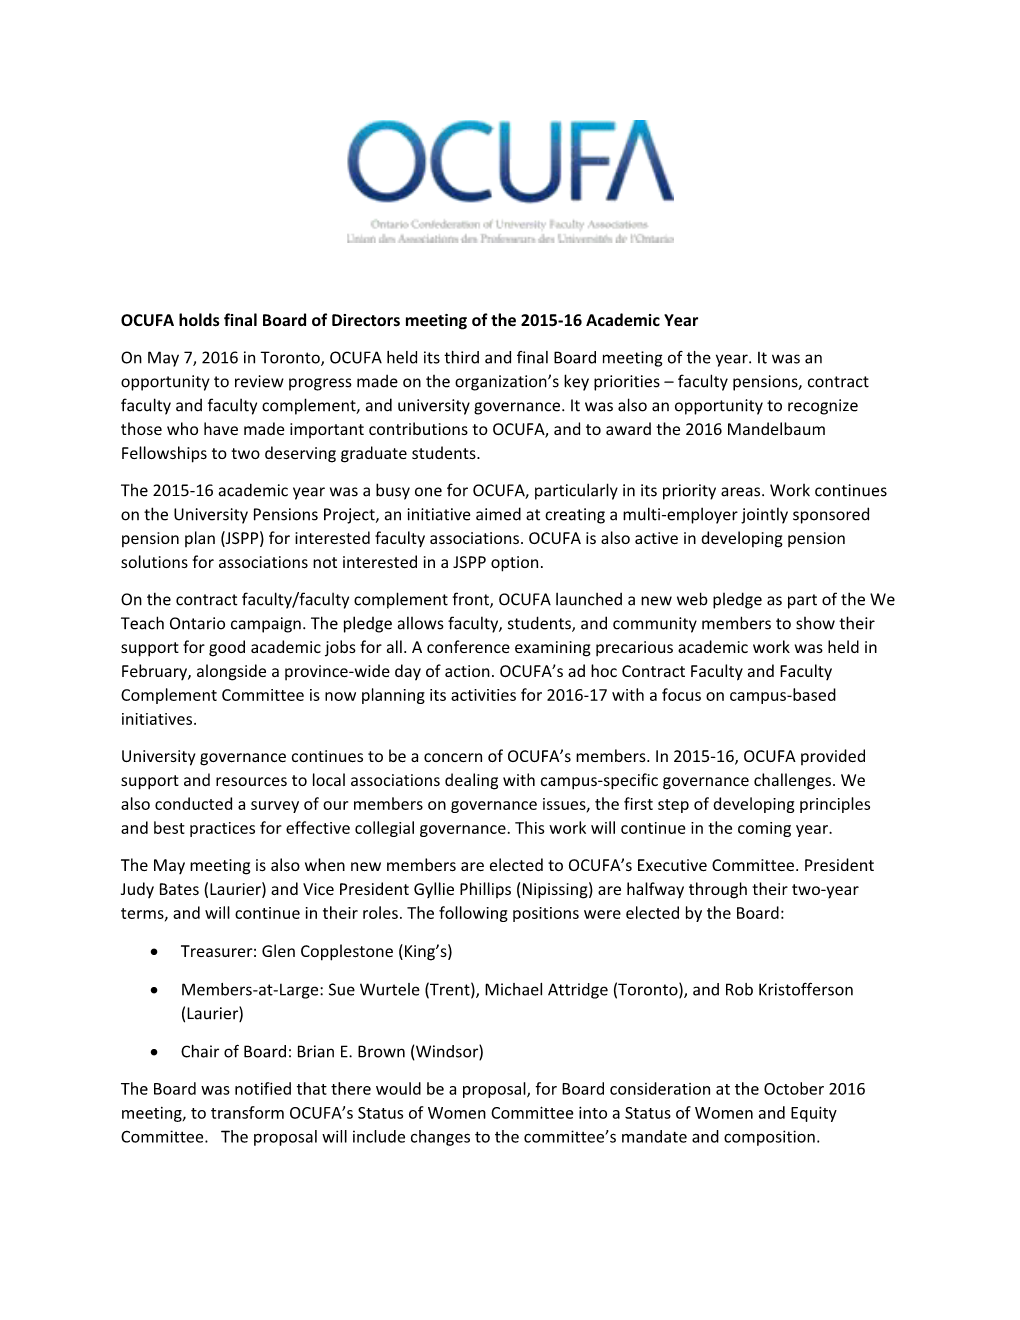 OCUFA Holds Final Board of Directors Meeting of the 2015-16 Academic Year